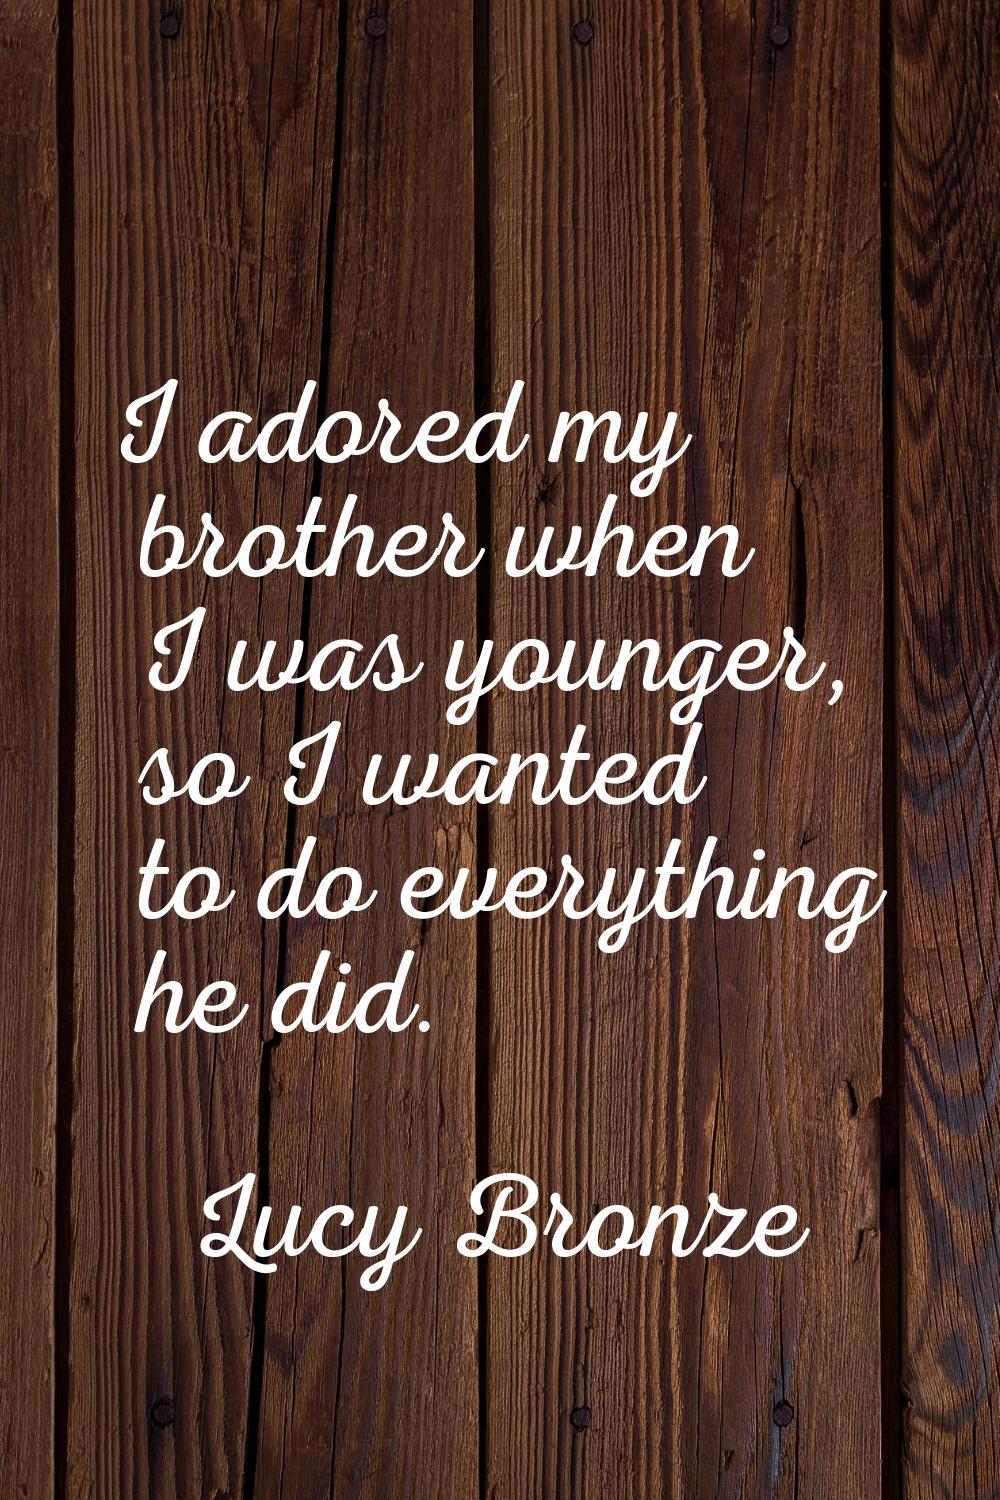 I adored my brother when I was younger, so I wanted to do everything he did.